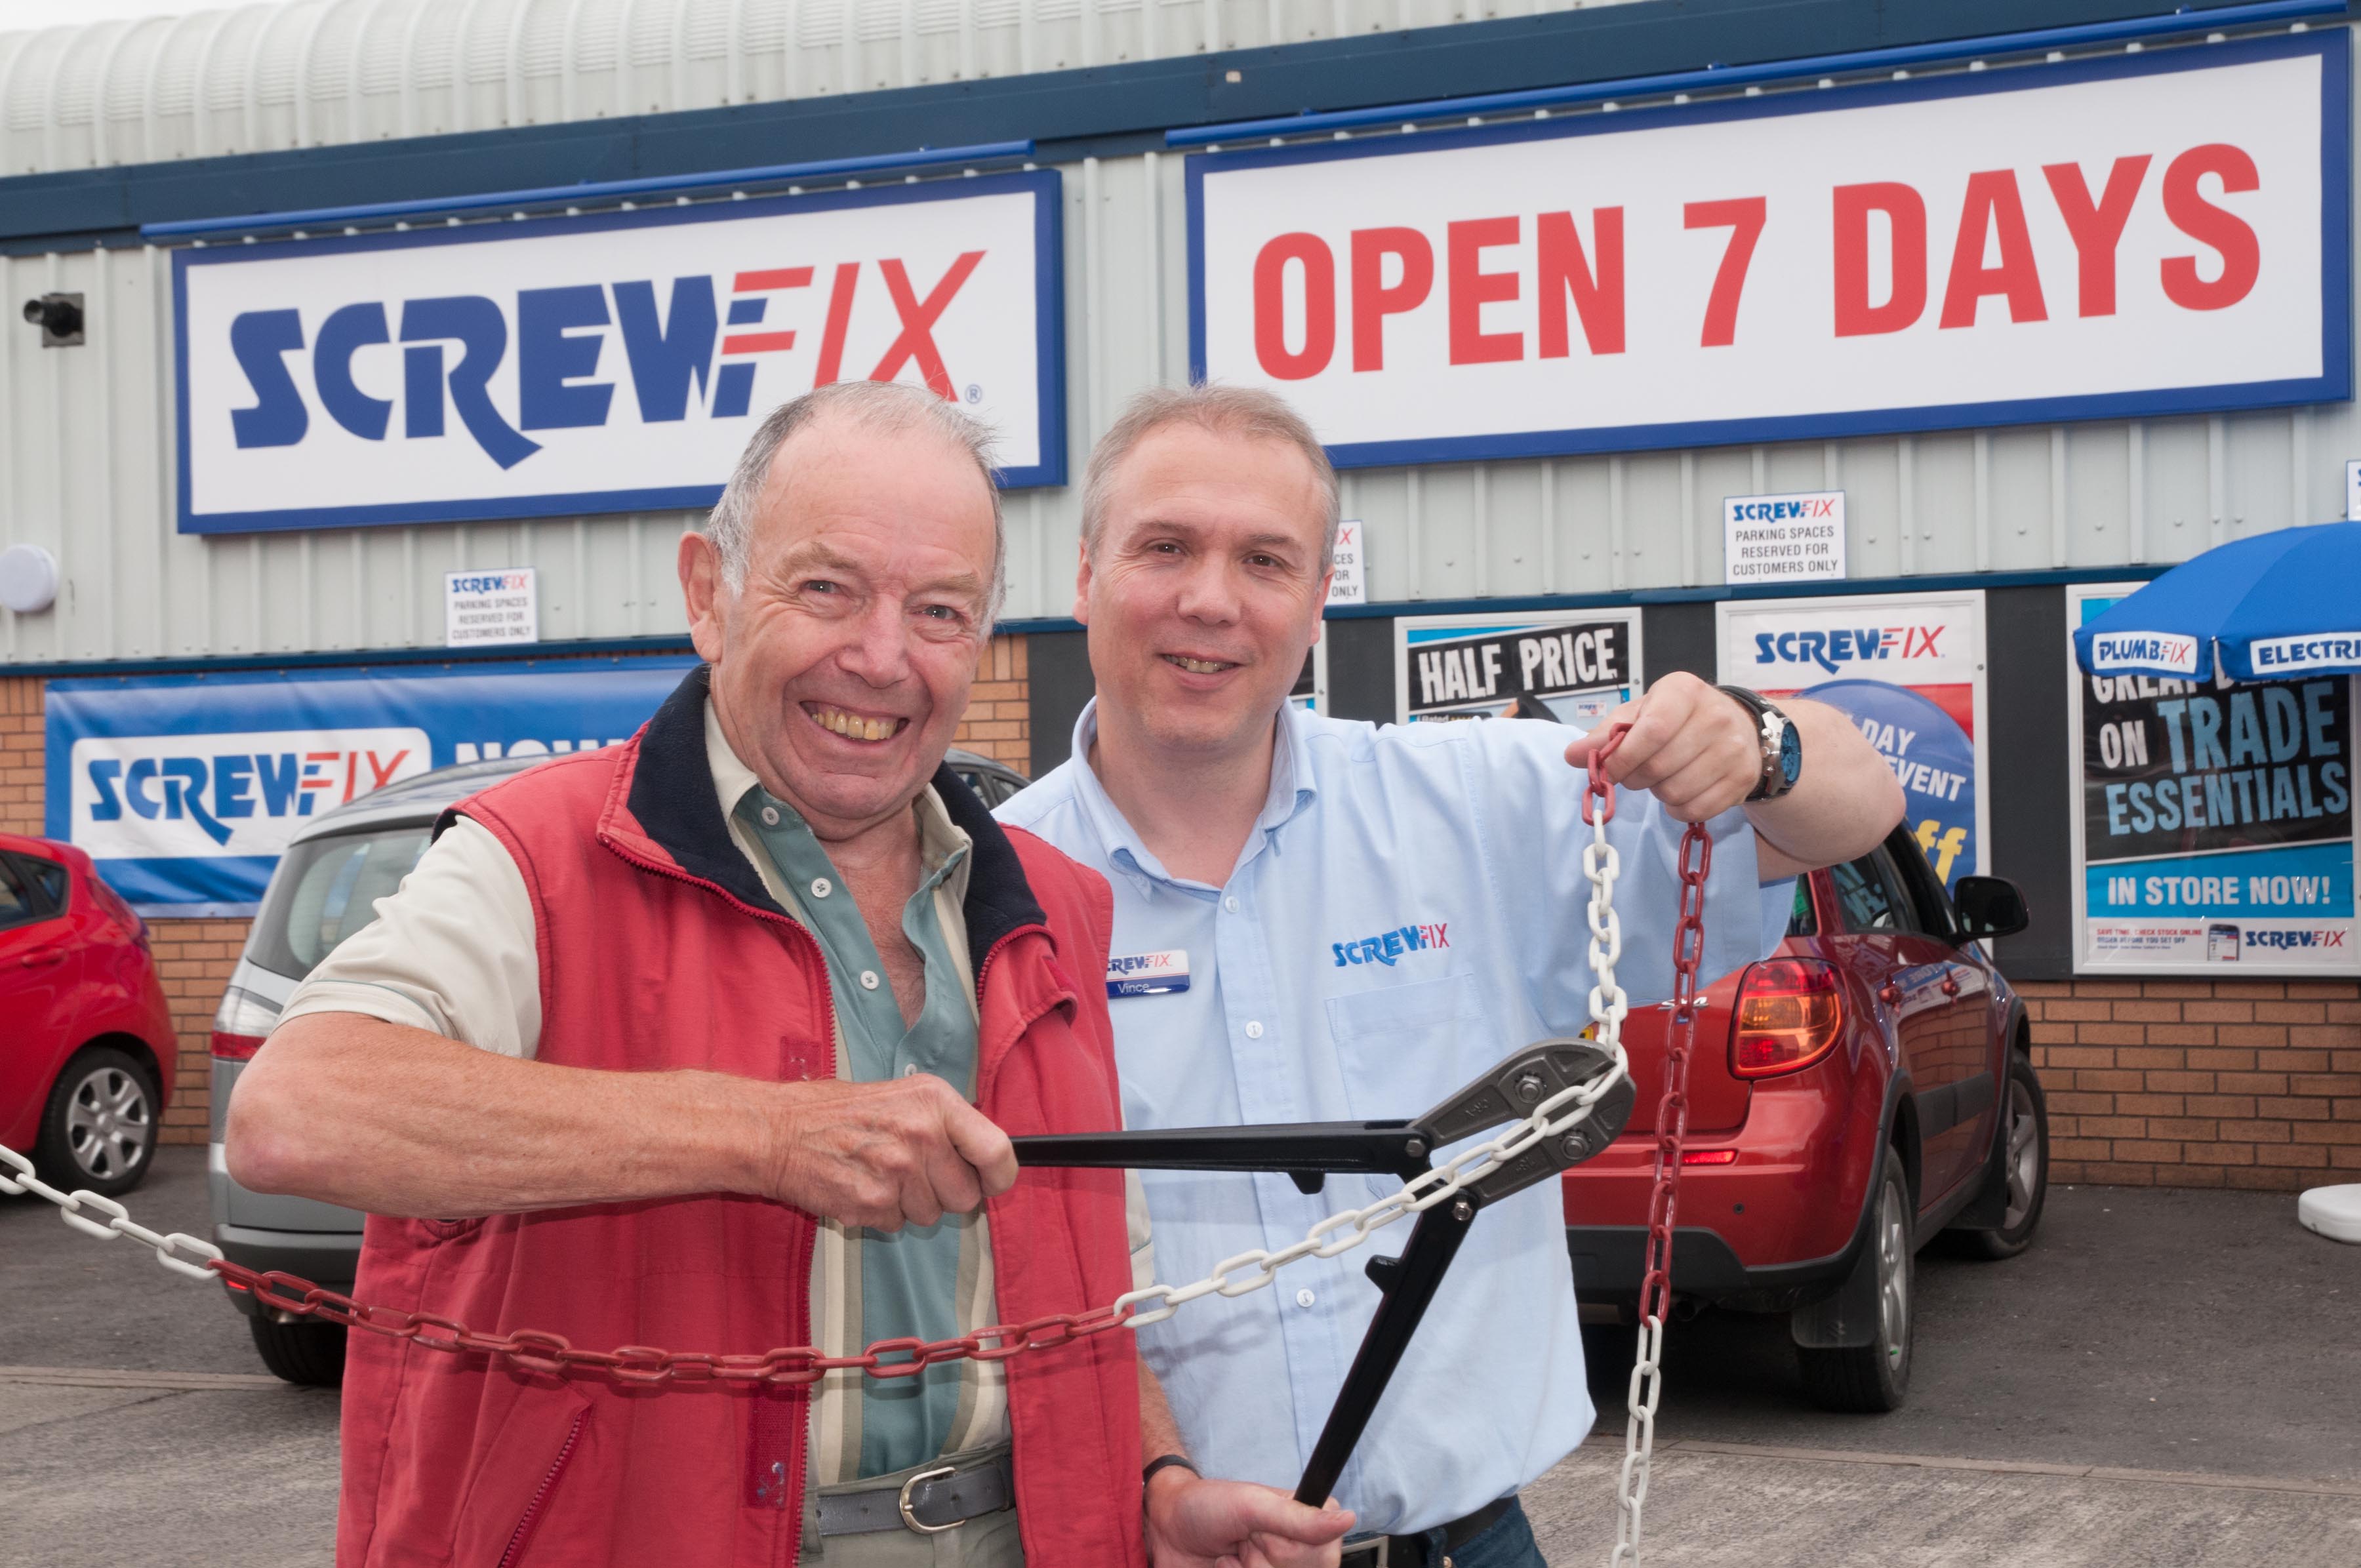 Two new Screwfix stores in South Wales declared as runaway successes